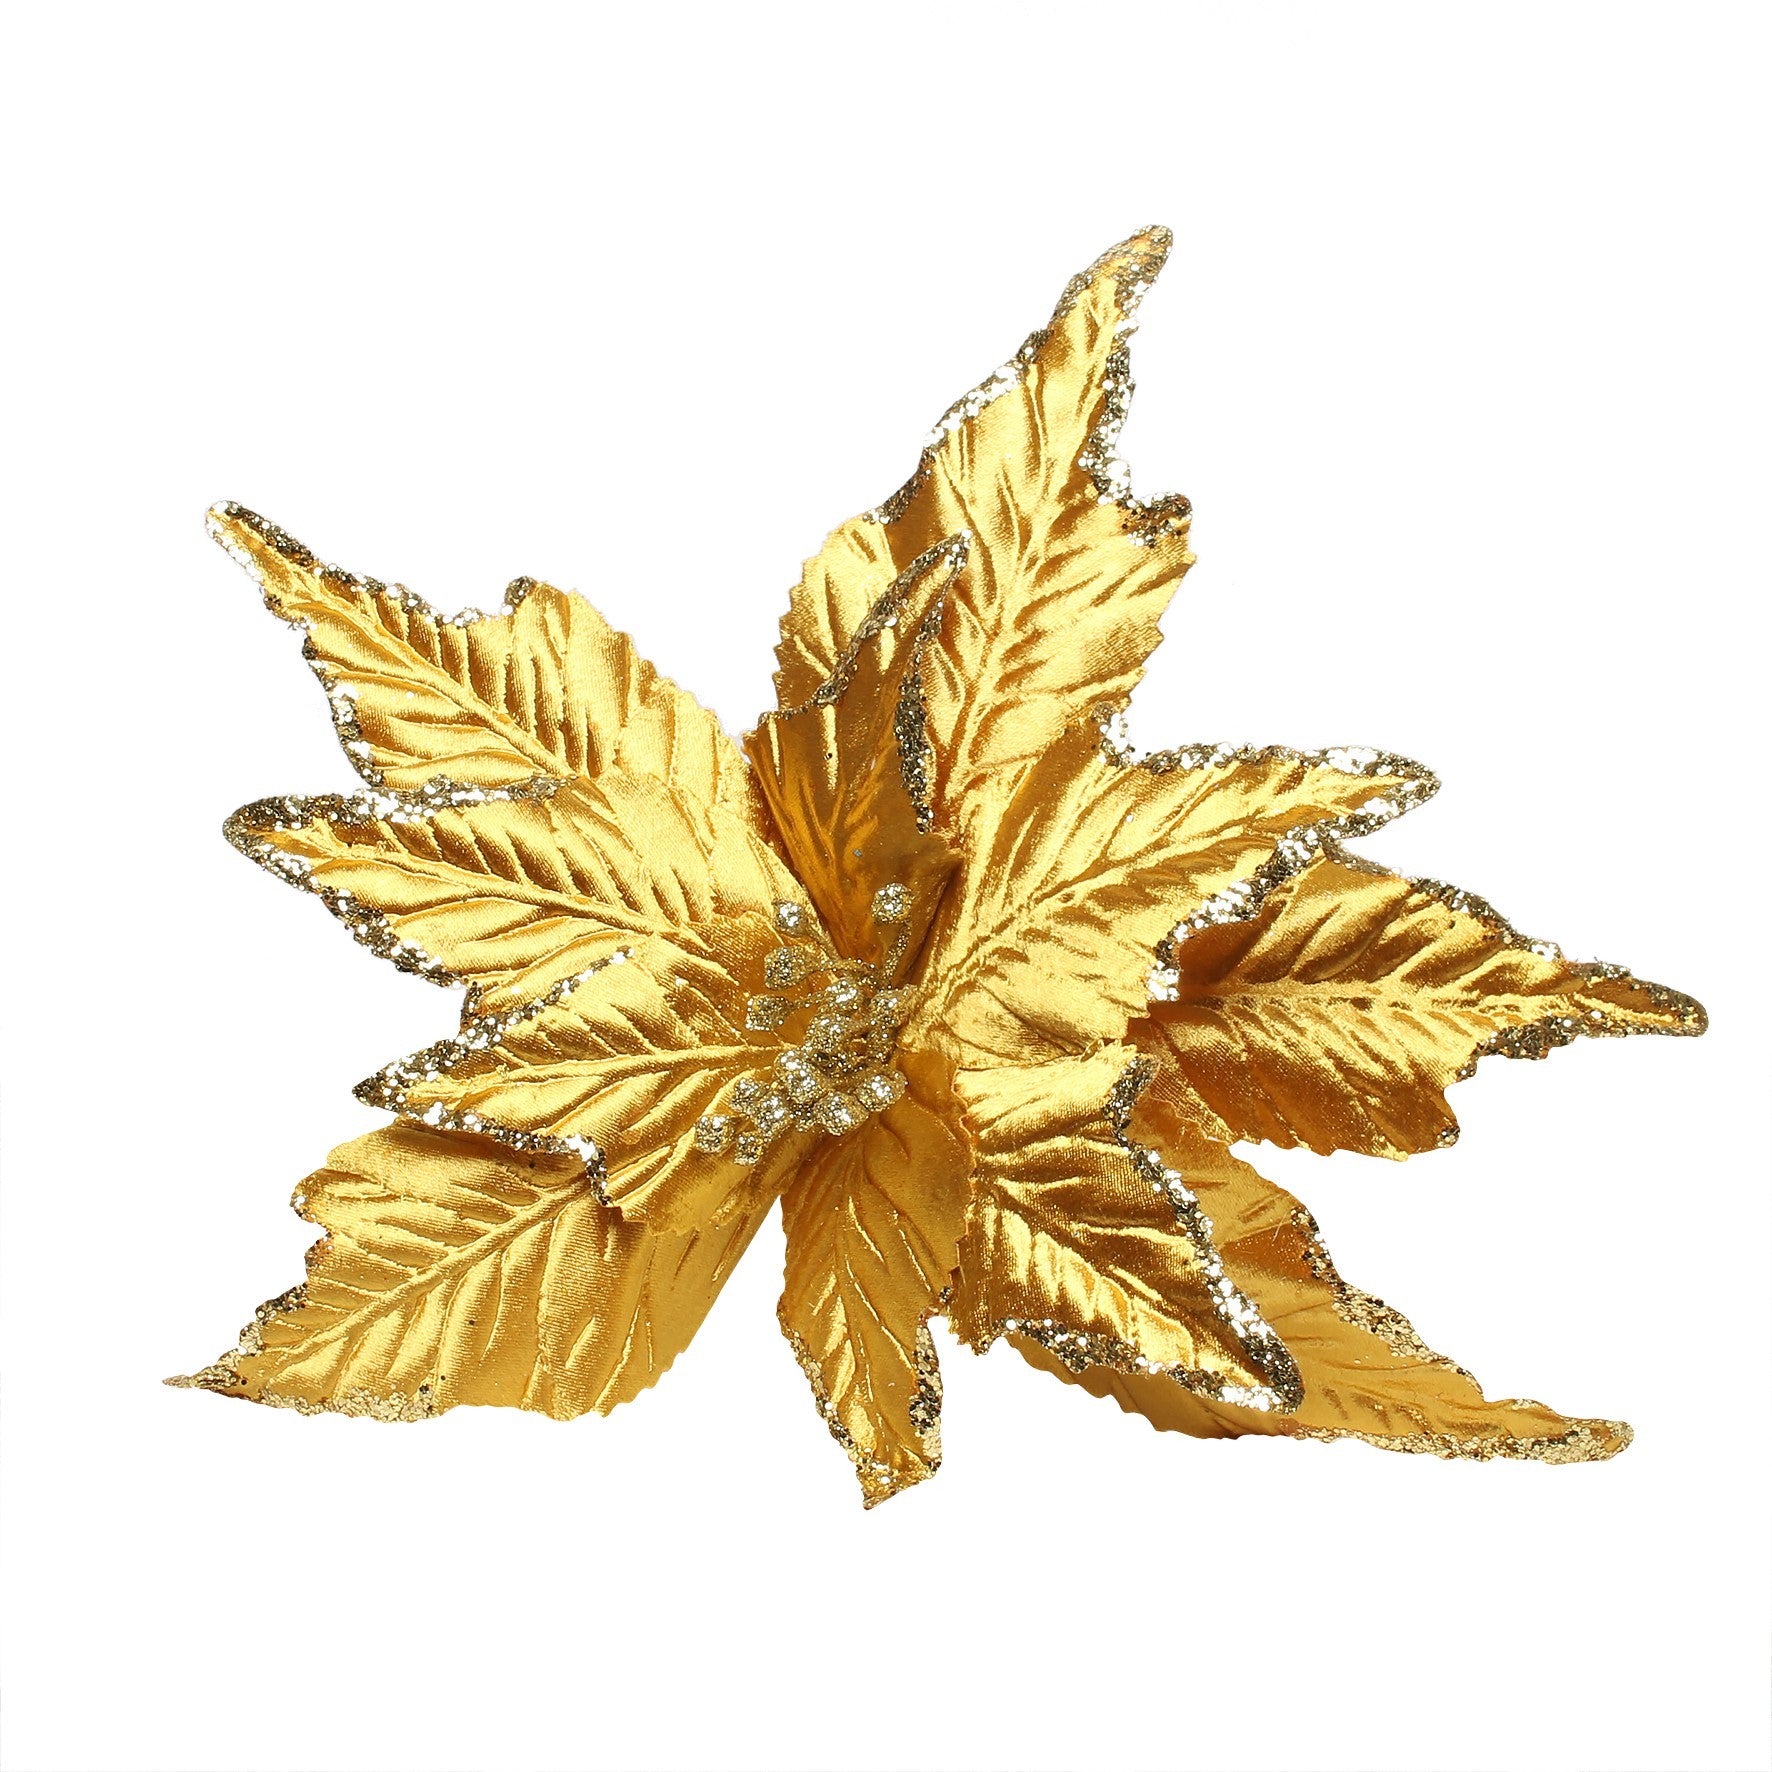 View Large Gold Poinsettia Pick information